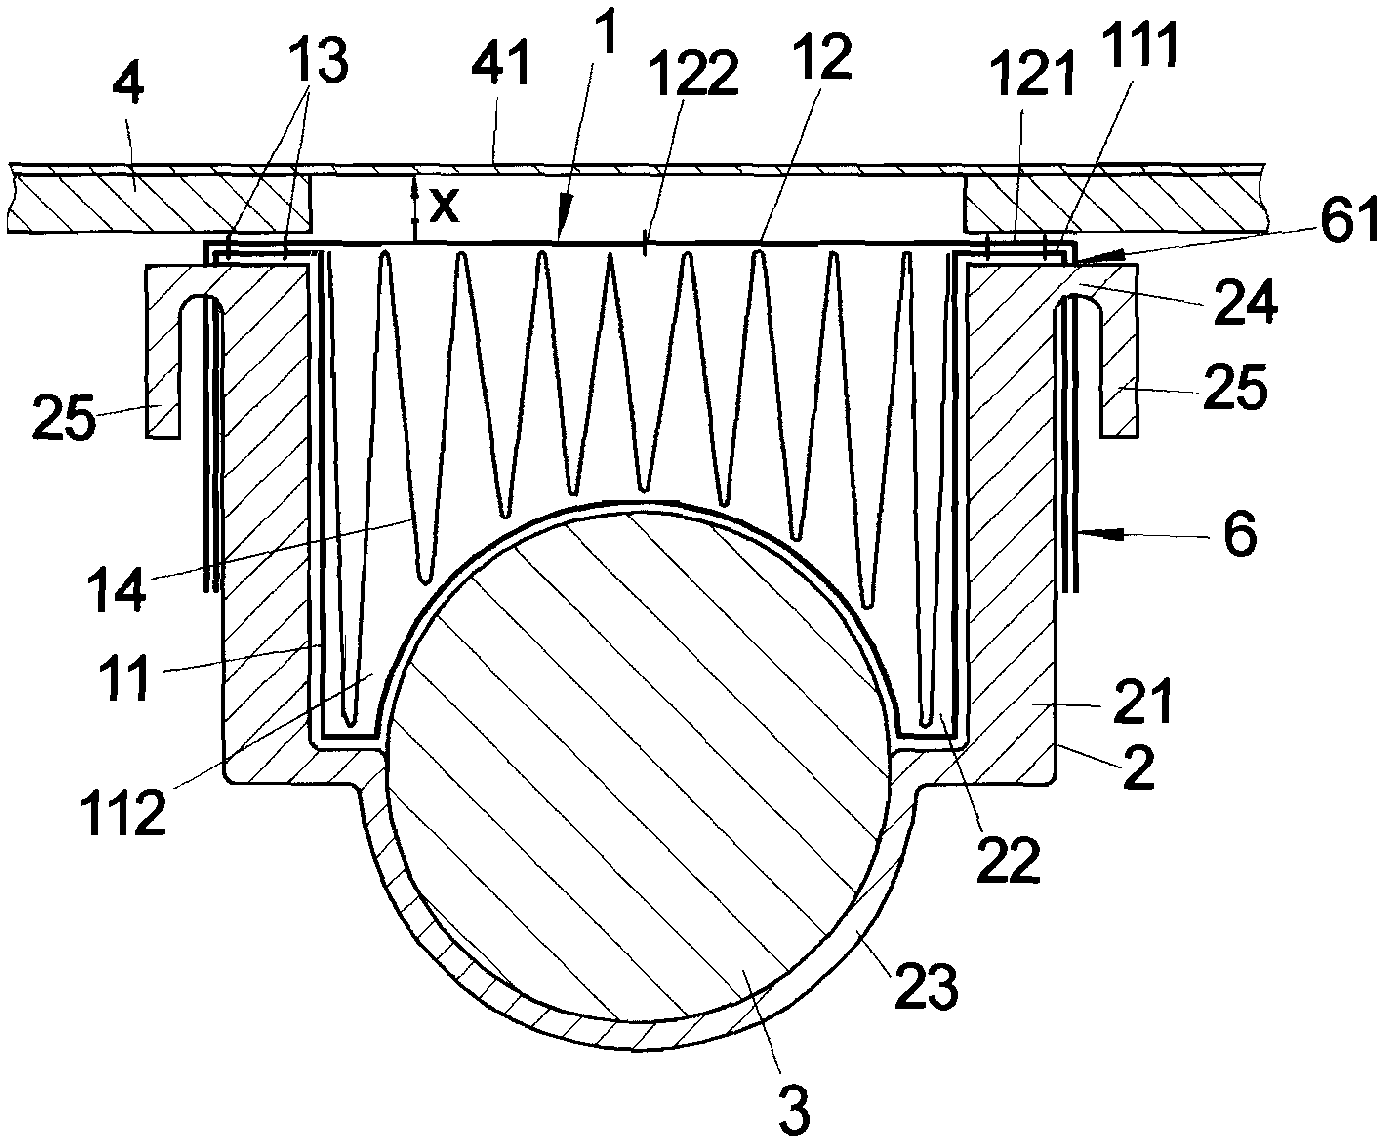 Airbag module for a vehicle occupant restraint system